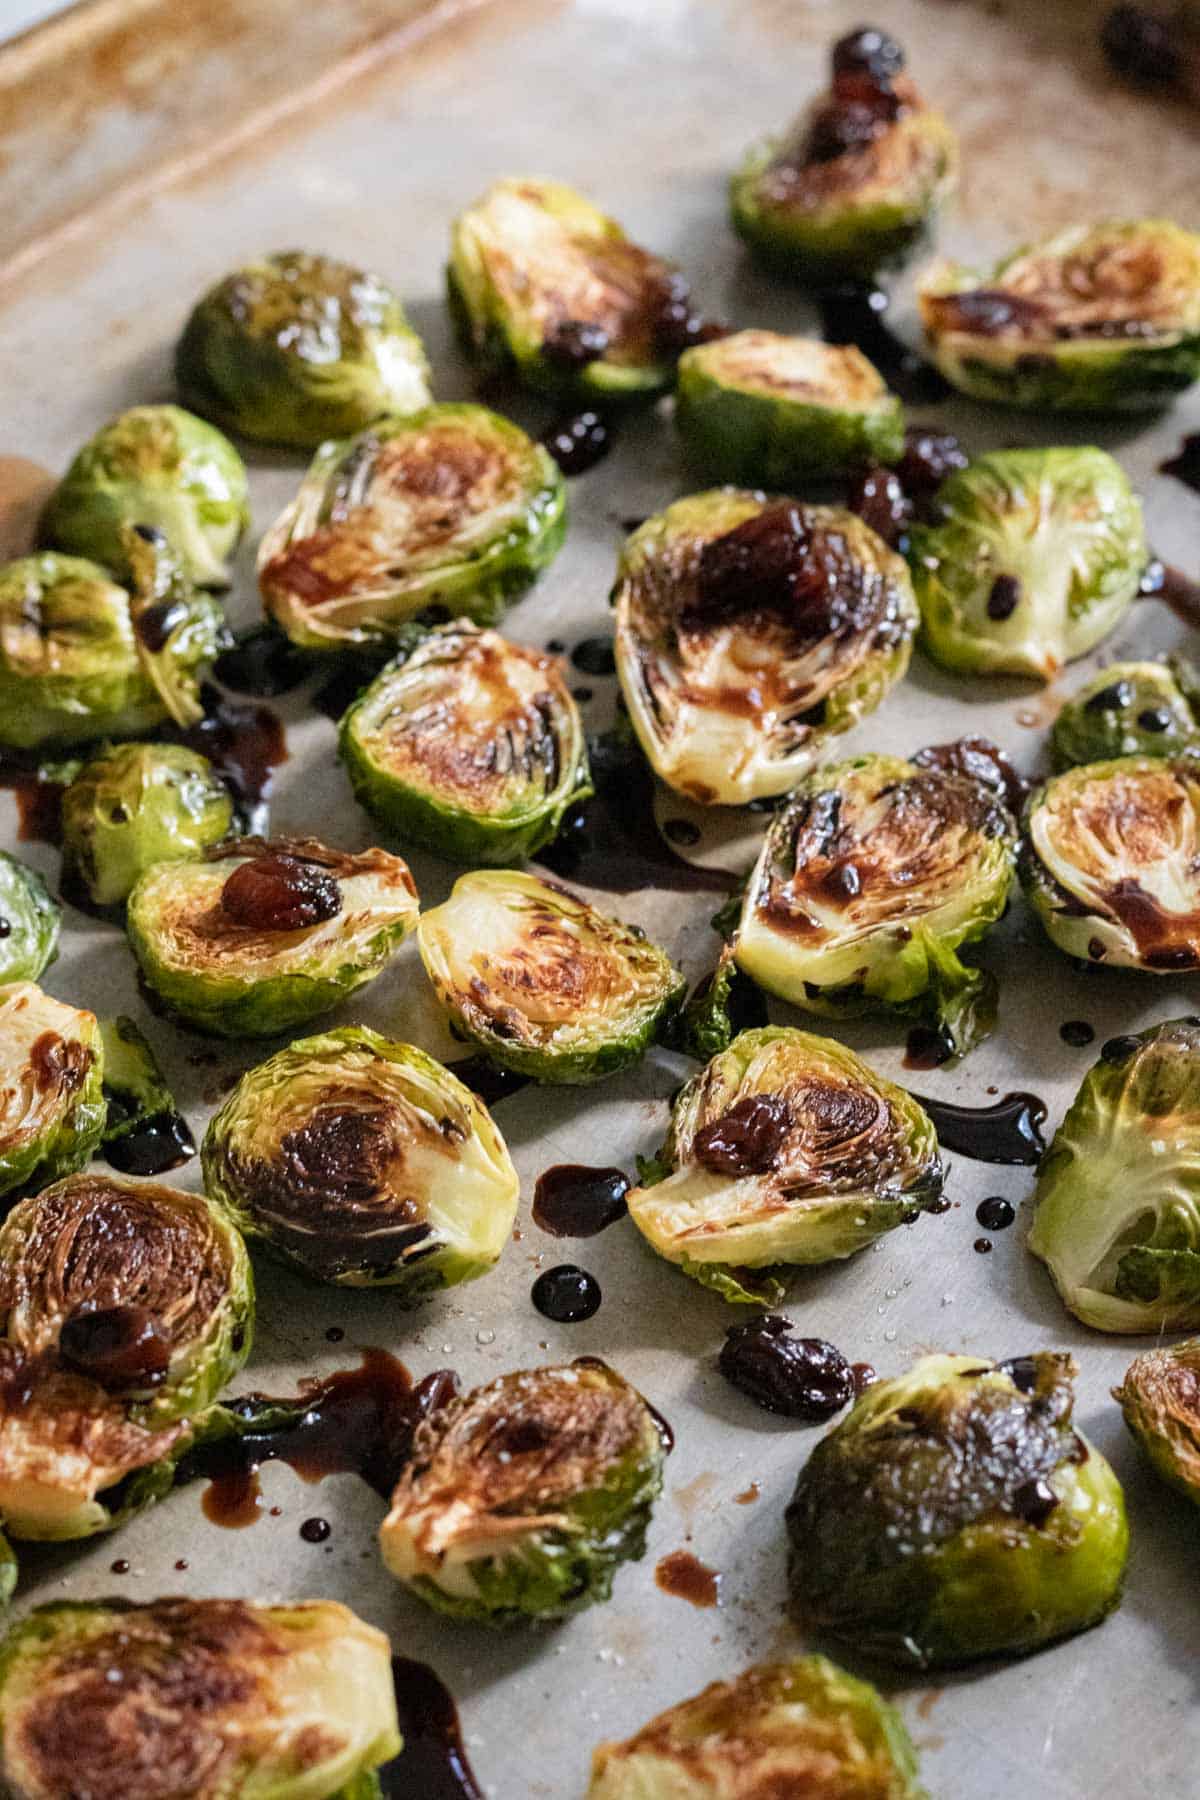 Seared Brussels sprouts drizzled with balsamic reduction and spread out on a large pan.